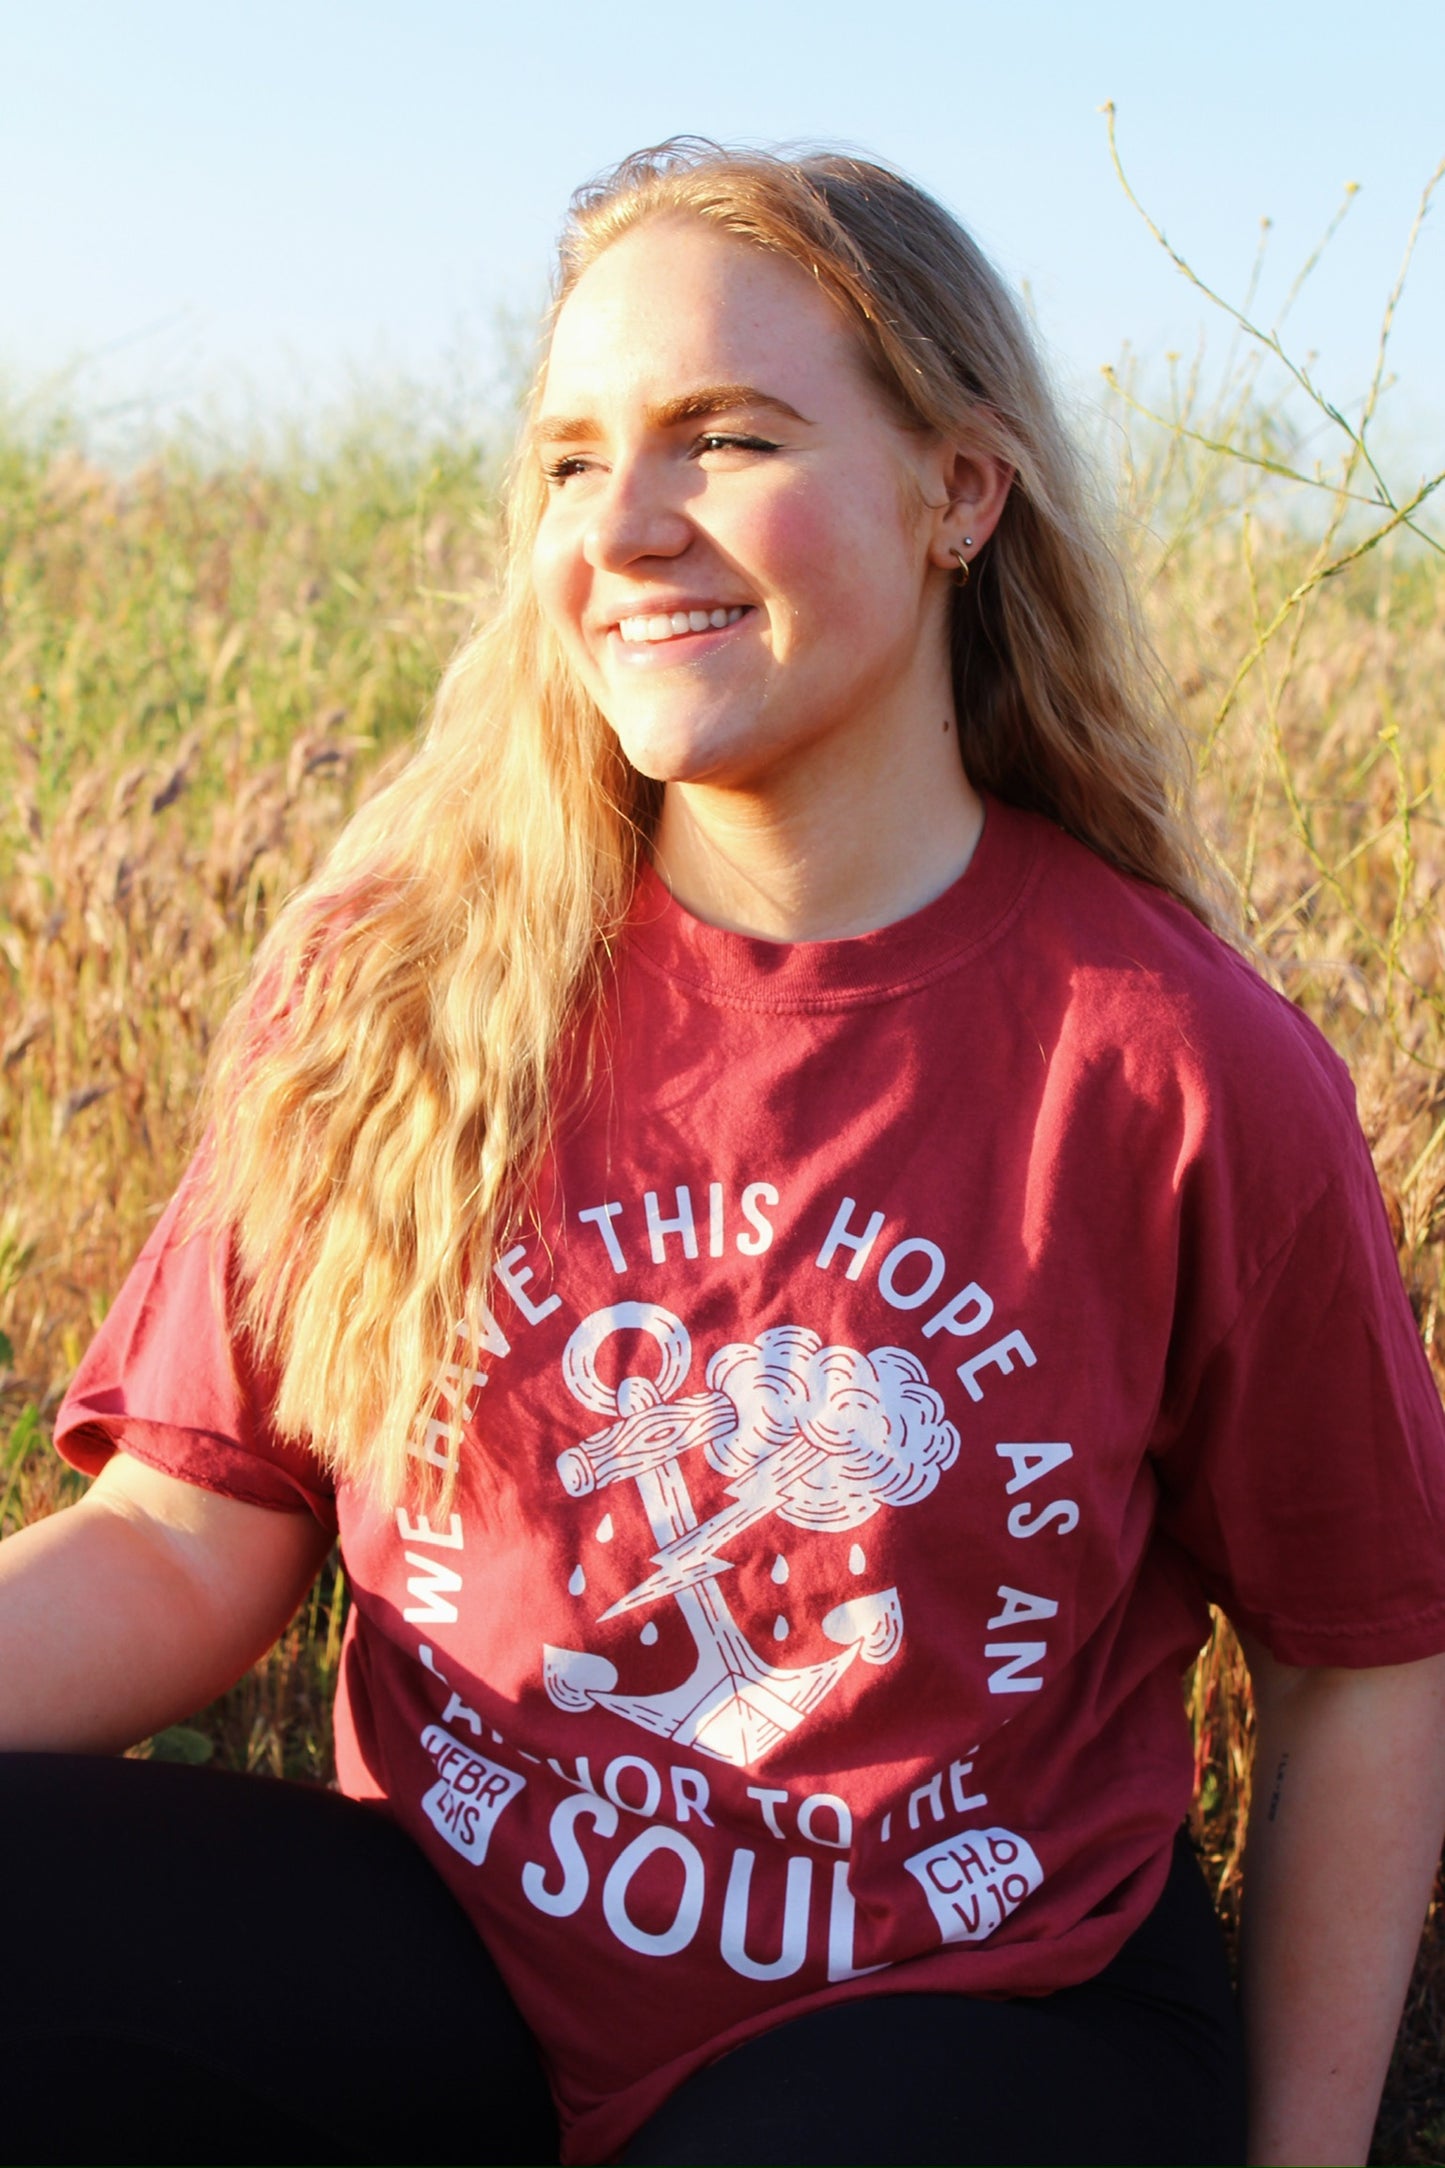 Anchor to the Soul Graphic Tee in Chili